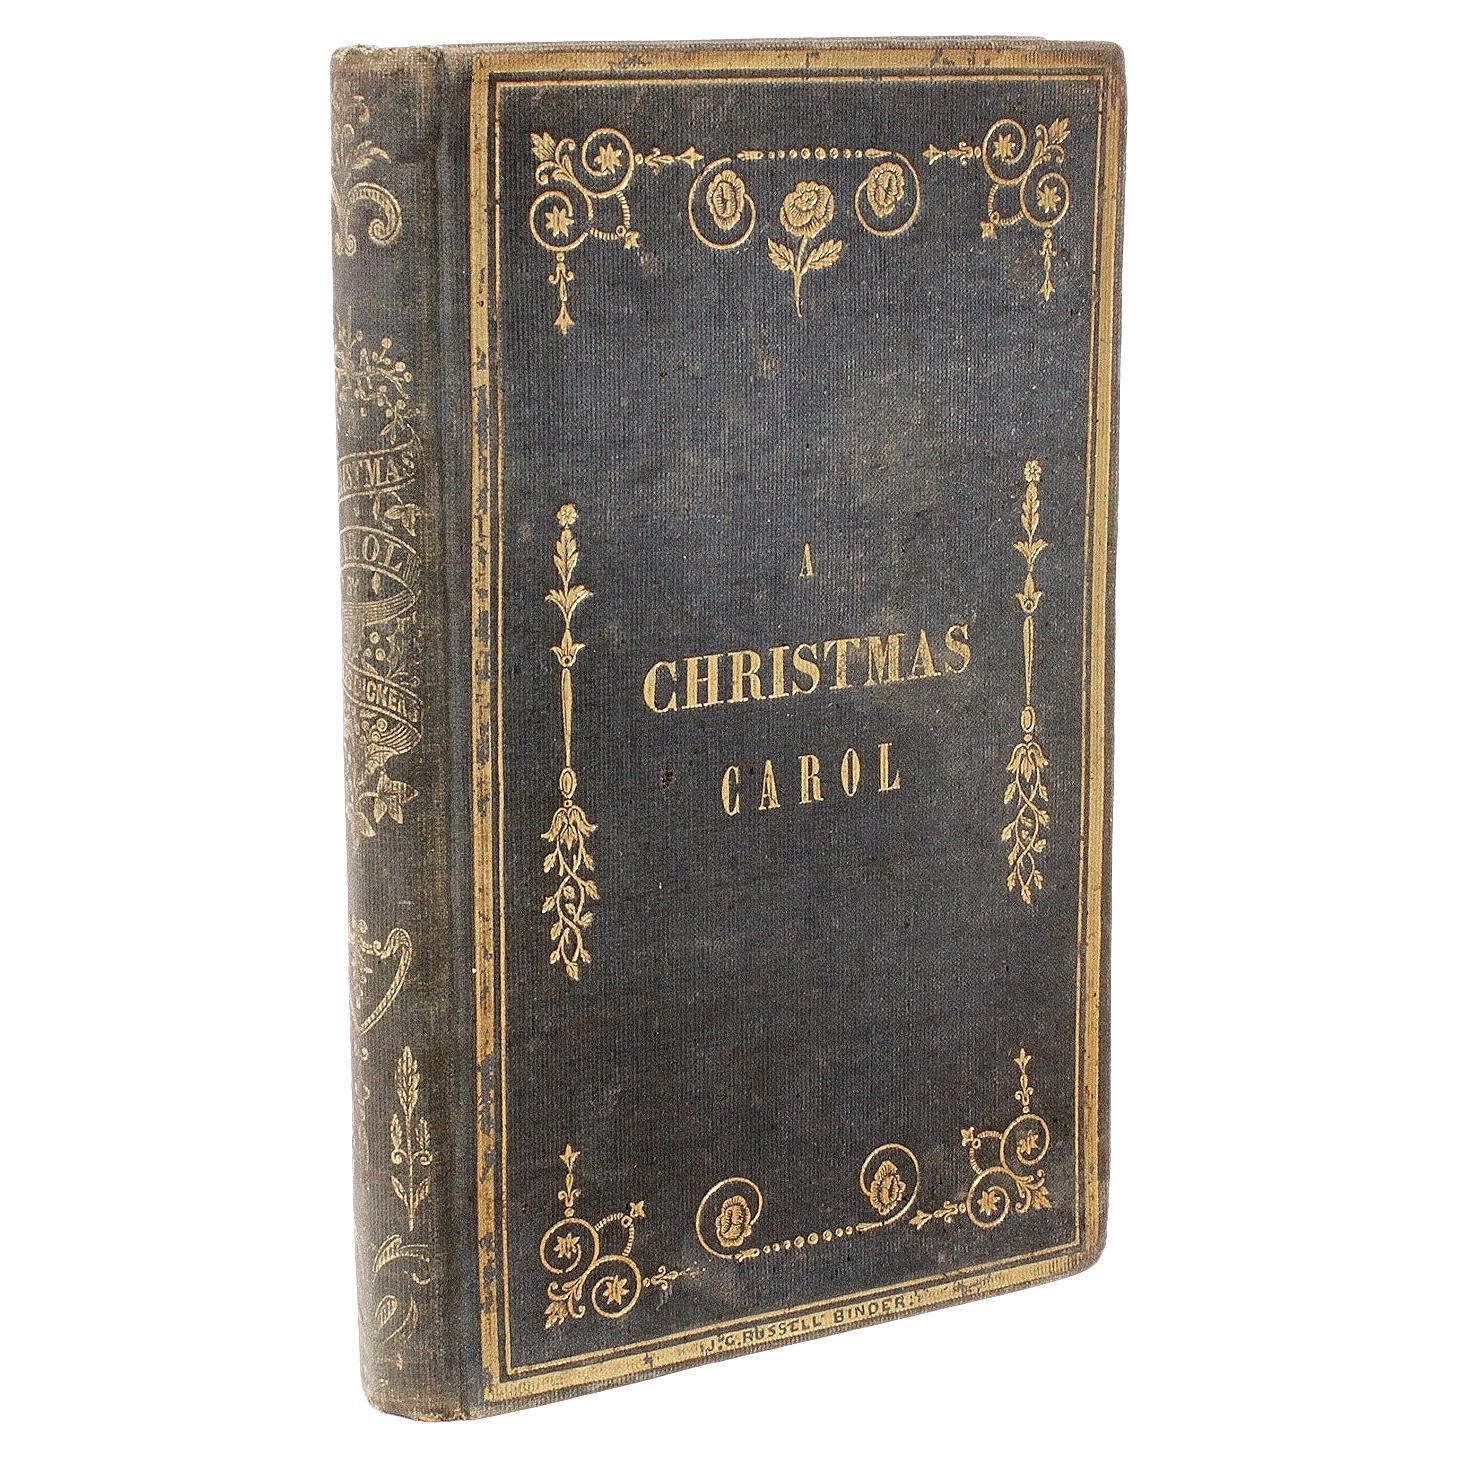 Charles DICKENS - A Christmas Carol - 1844 - FIRST AMERICAN EDITION - IN CLOTH